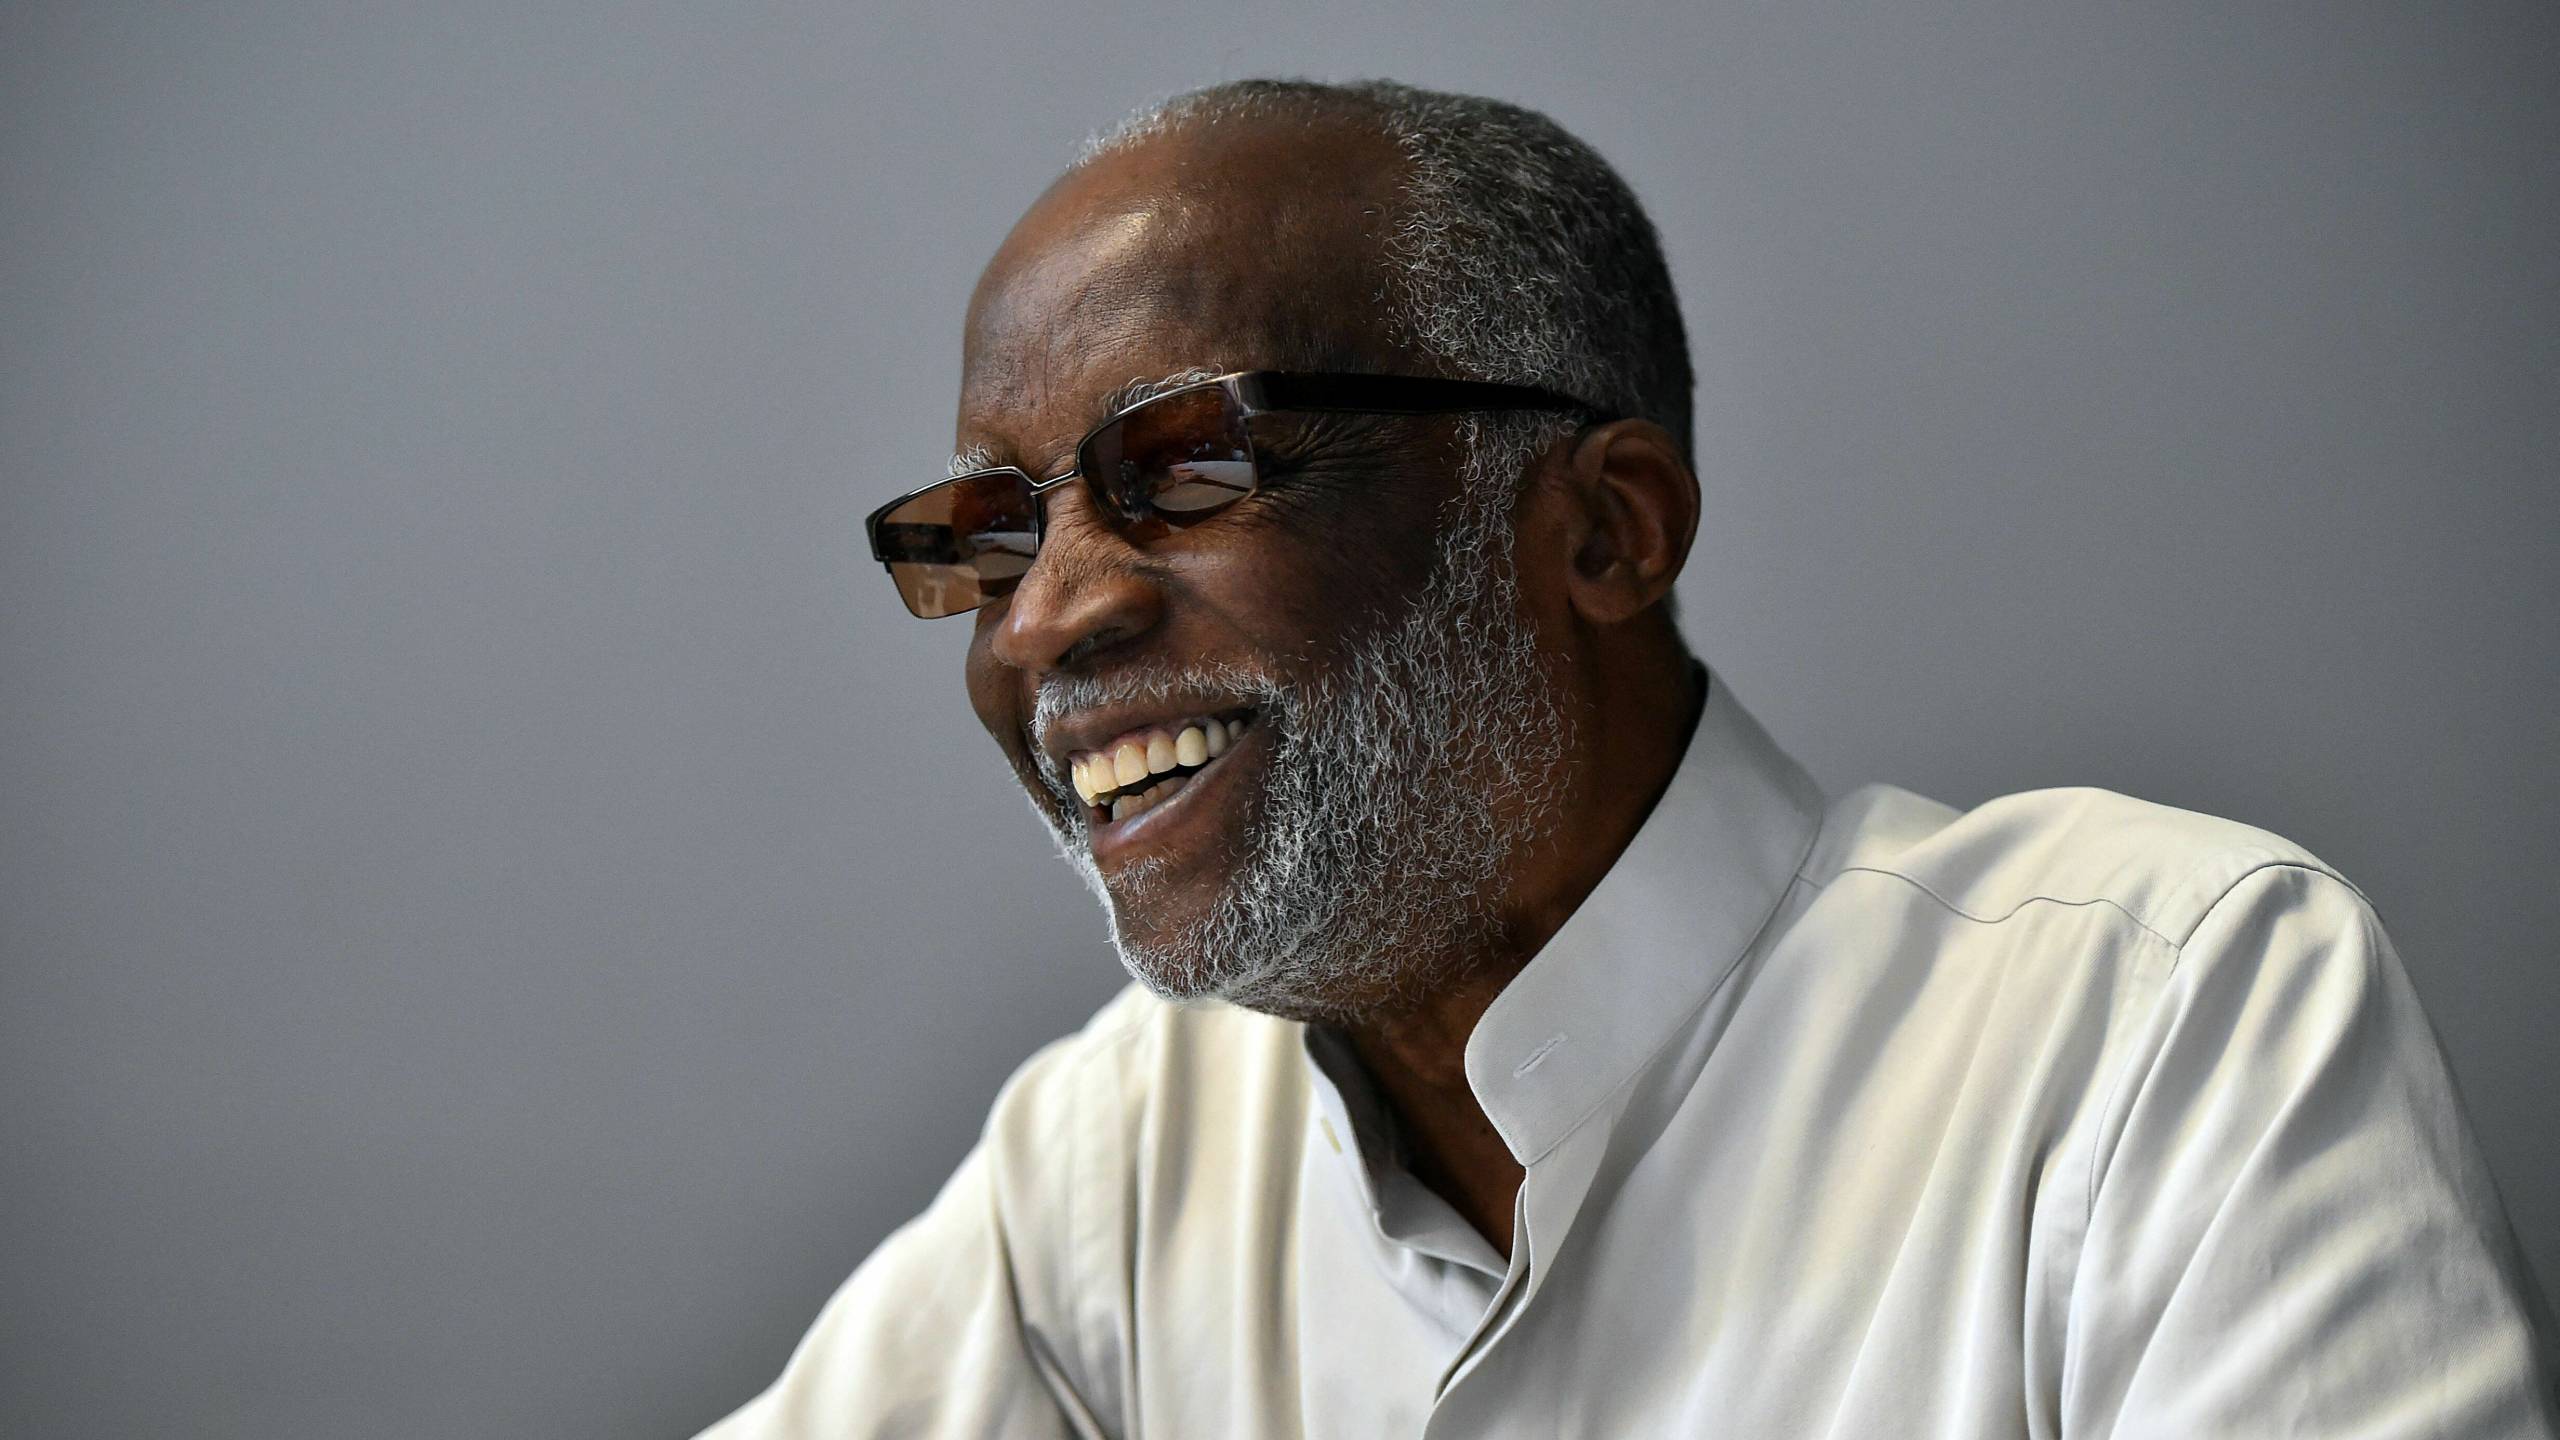 Black man in sunglasses and white shirt smiles